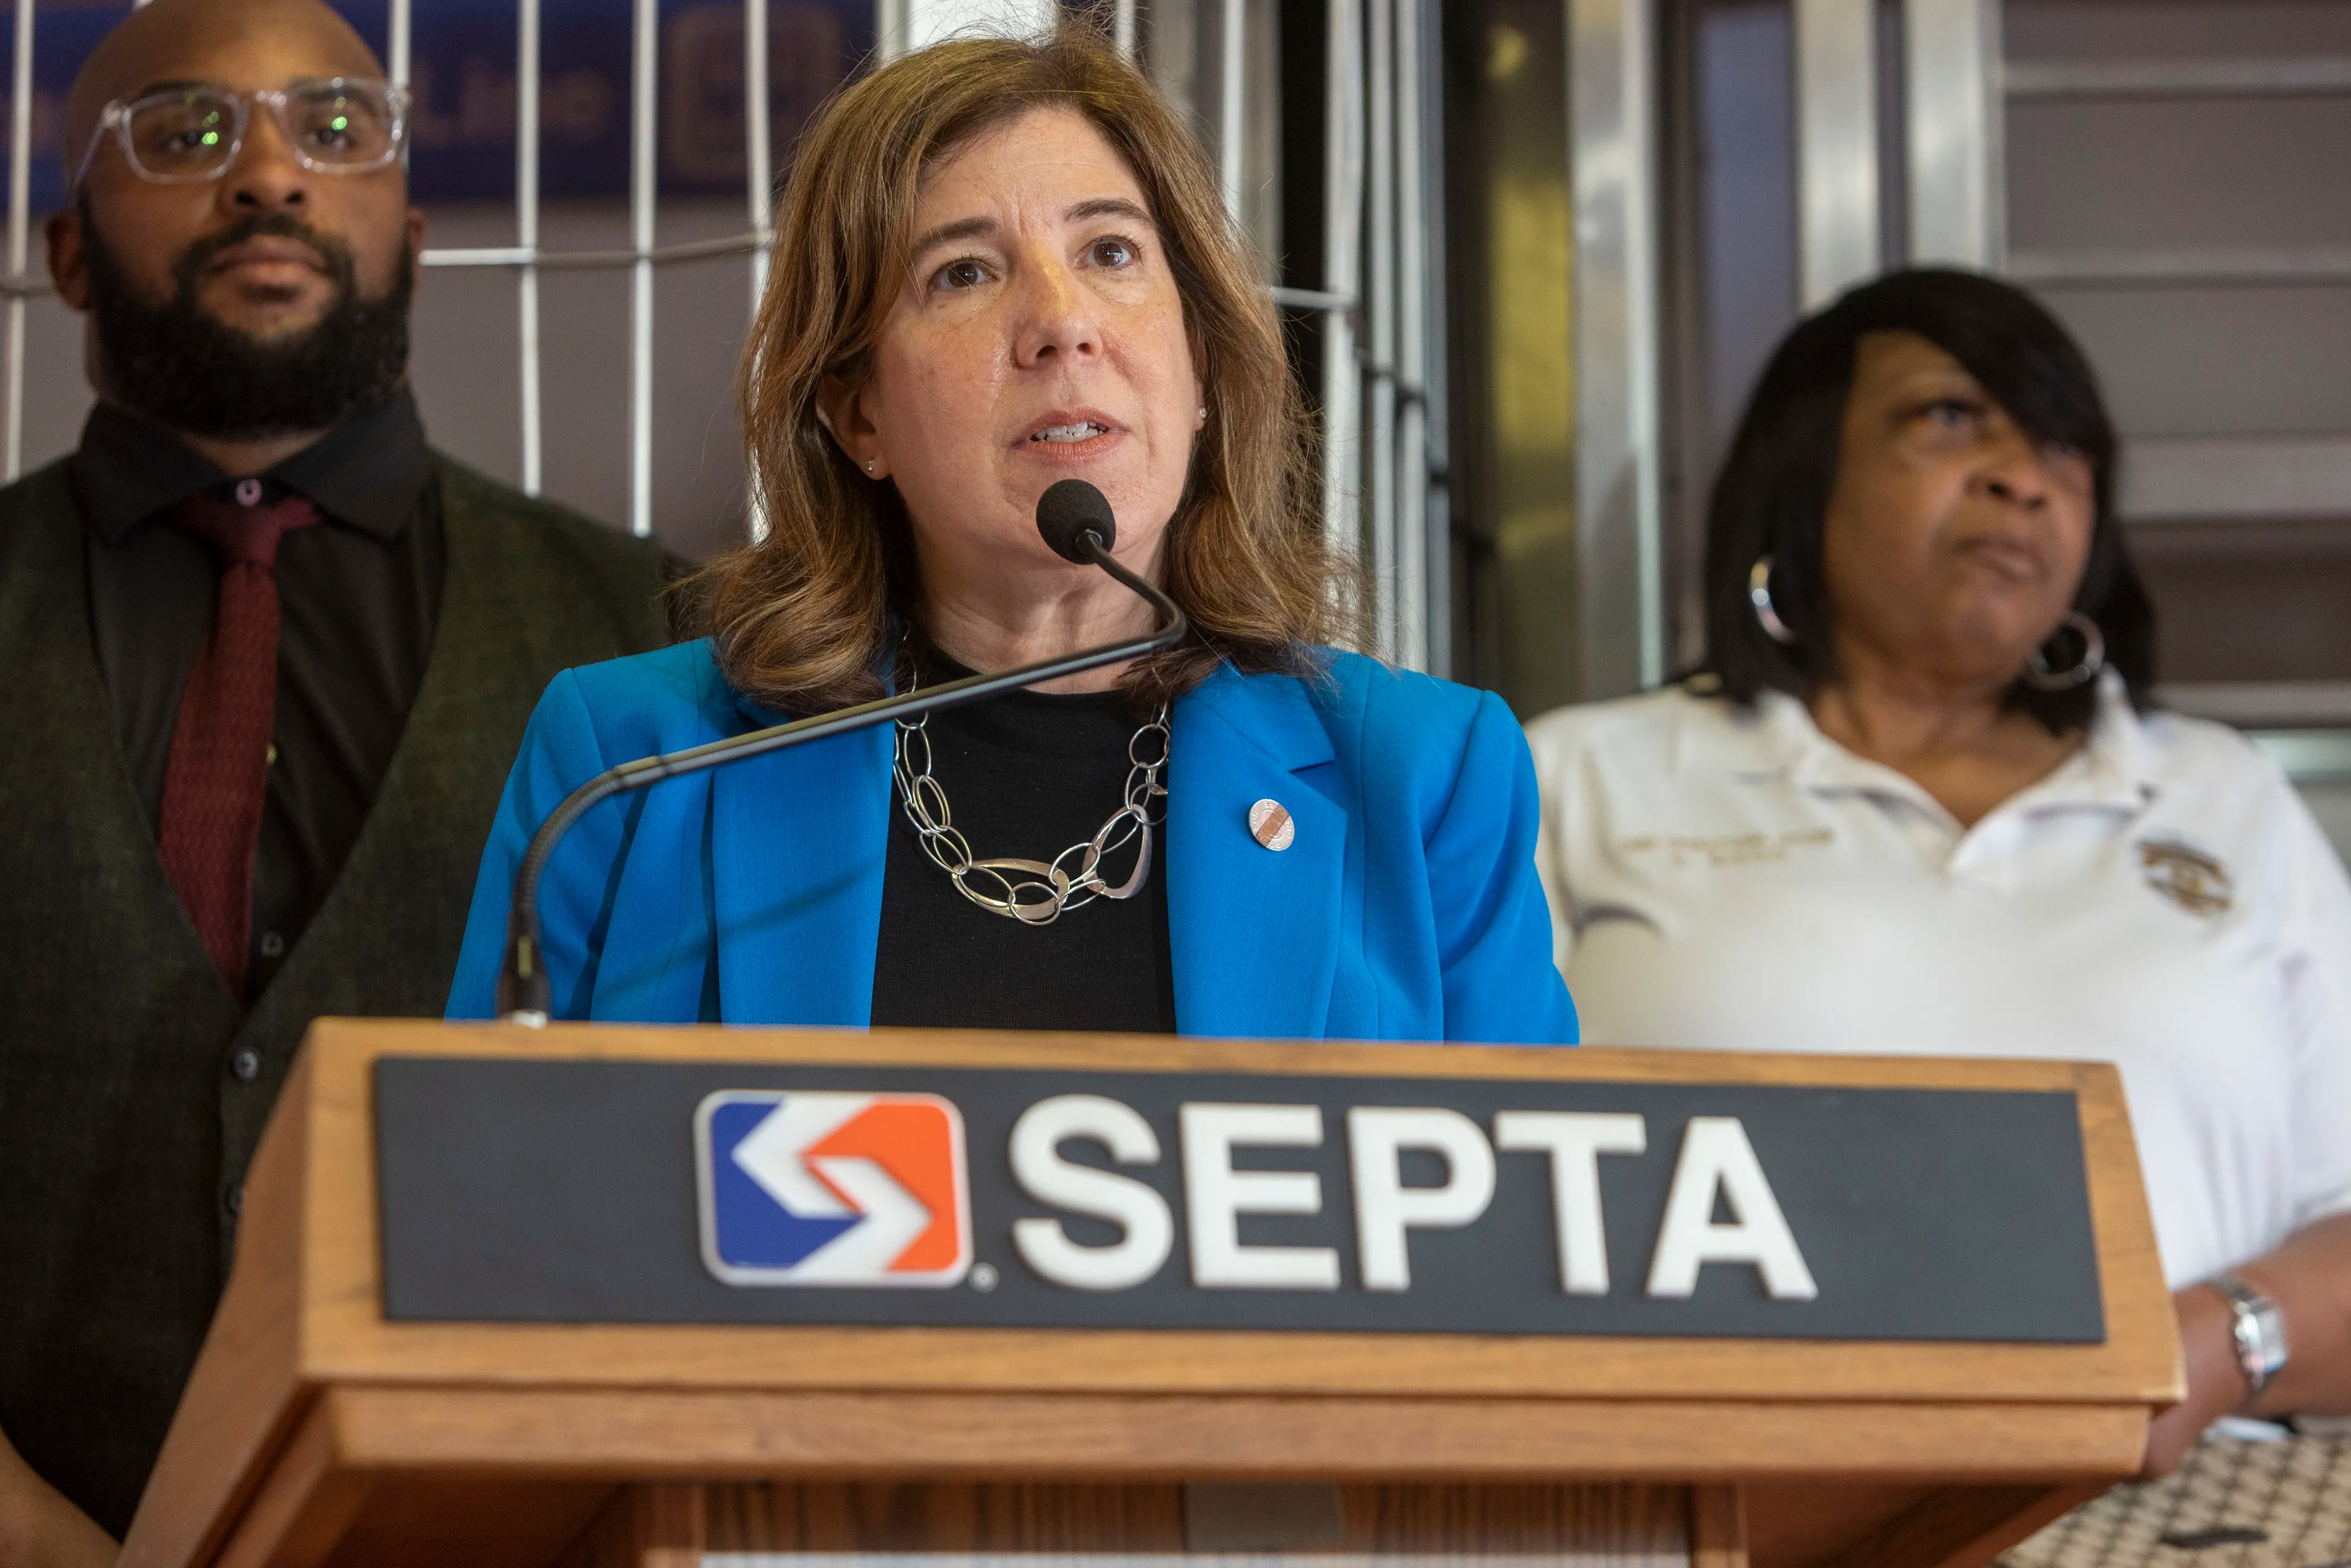 SEPTA CEO Leslie S. Richard speaks during a press conference at Dilworth Plaza on Thursday, May 5, 2022.